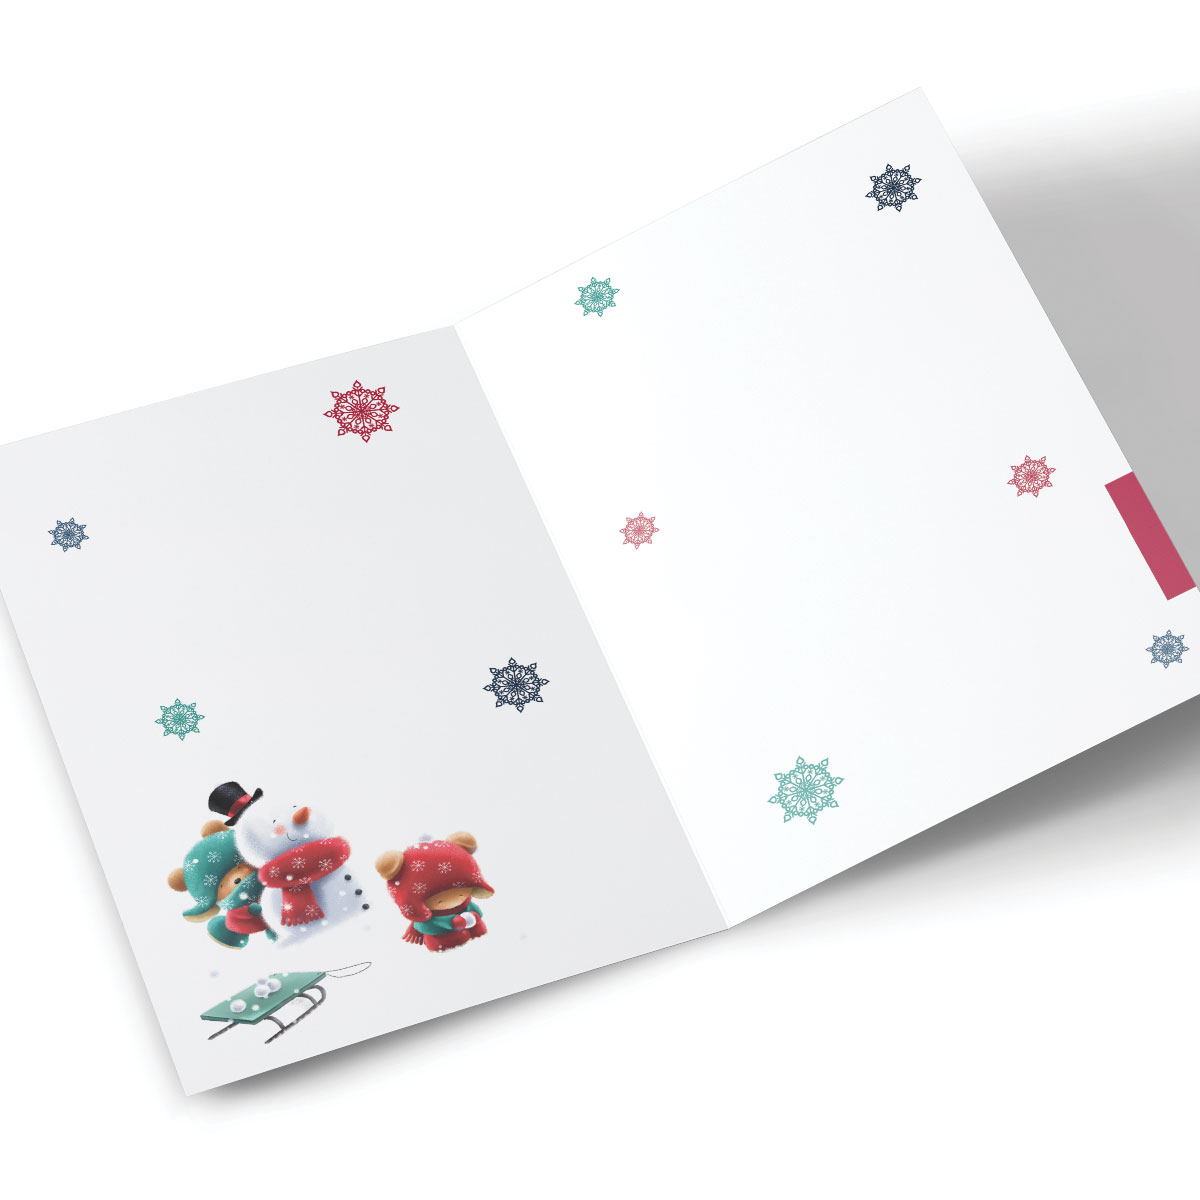 Personalised Christmas Card - For Both Of You Snowball Fight